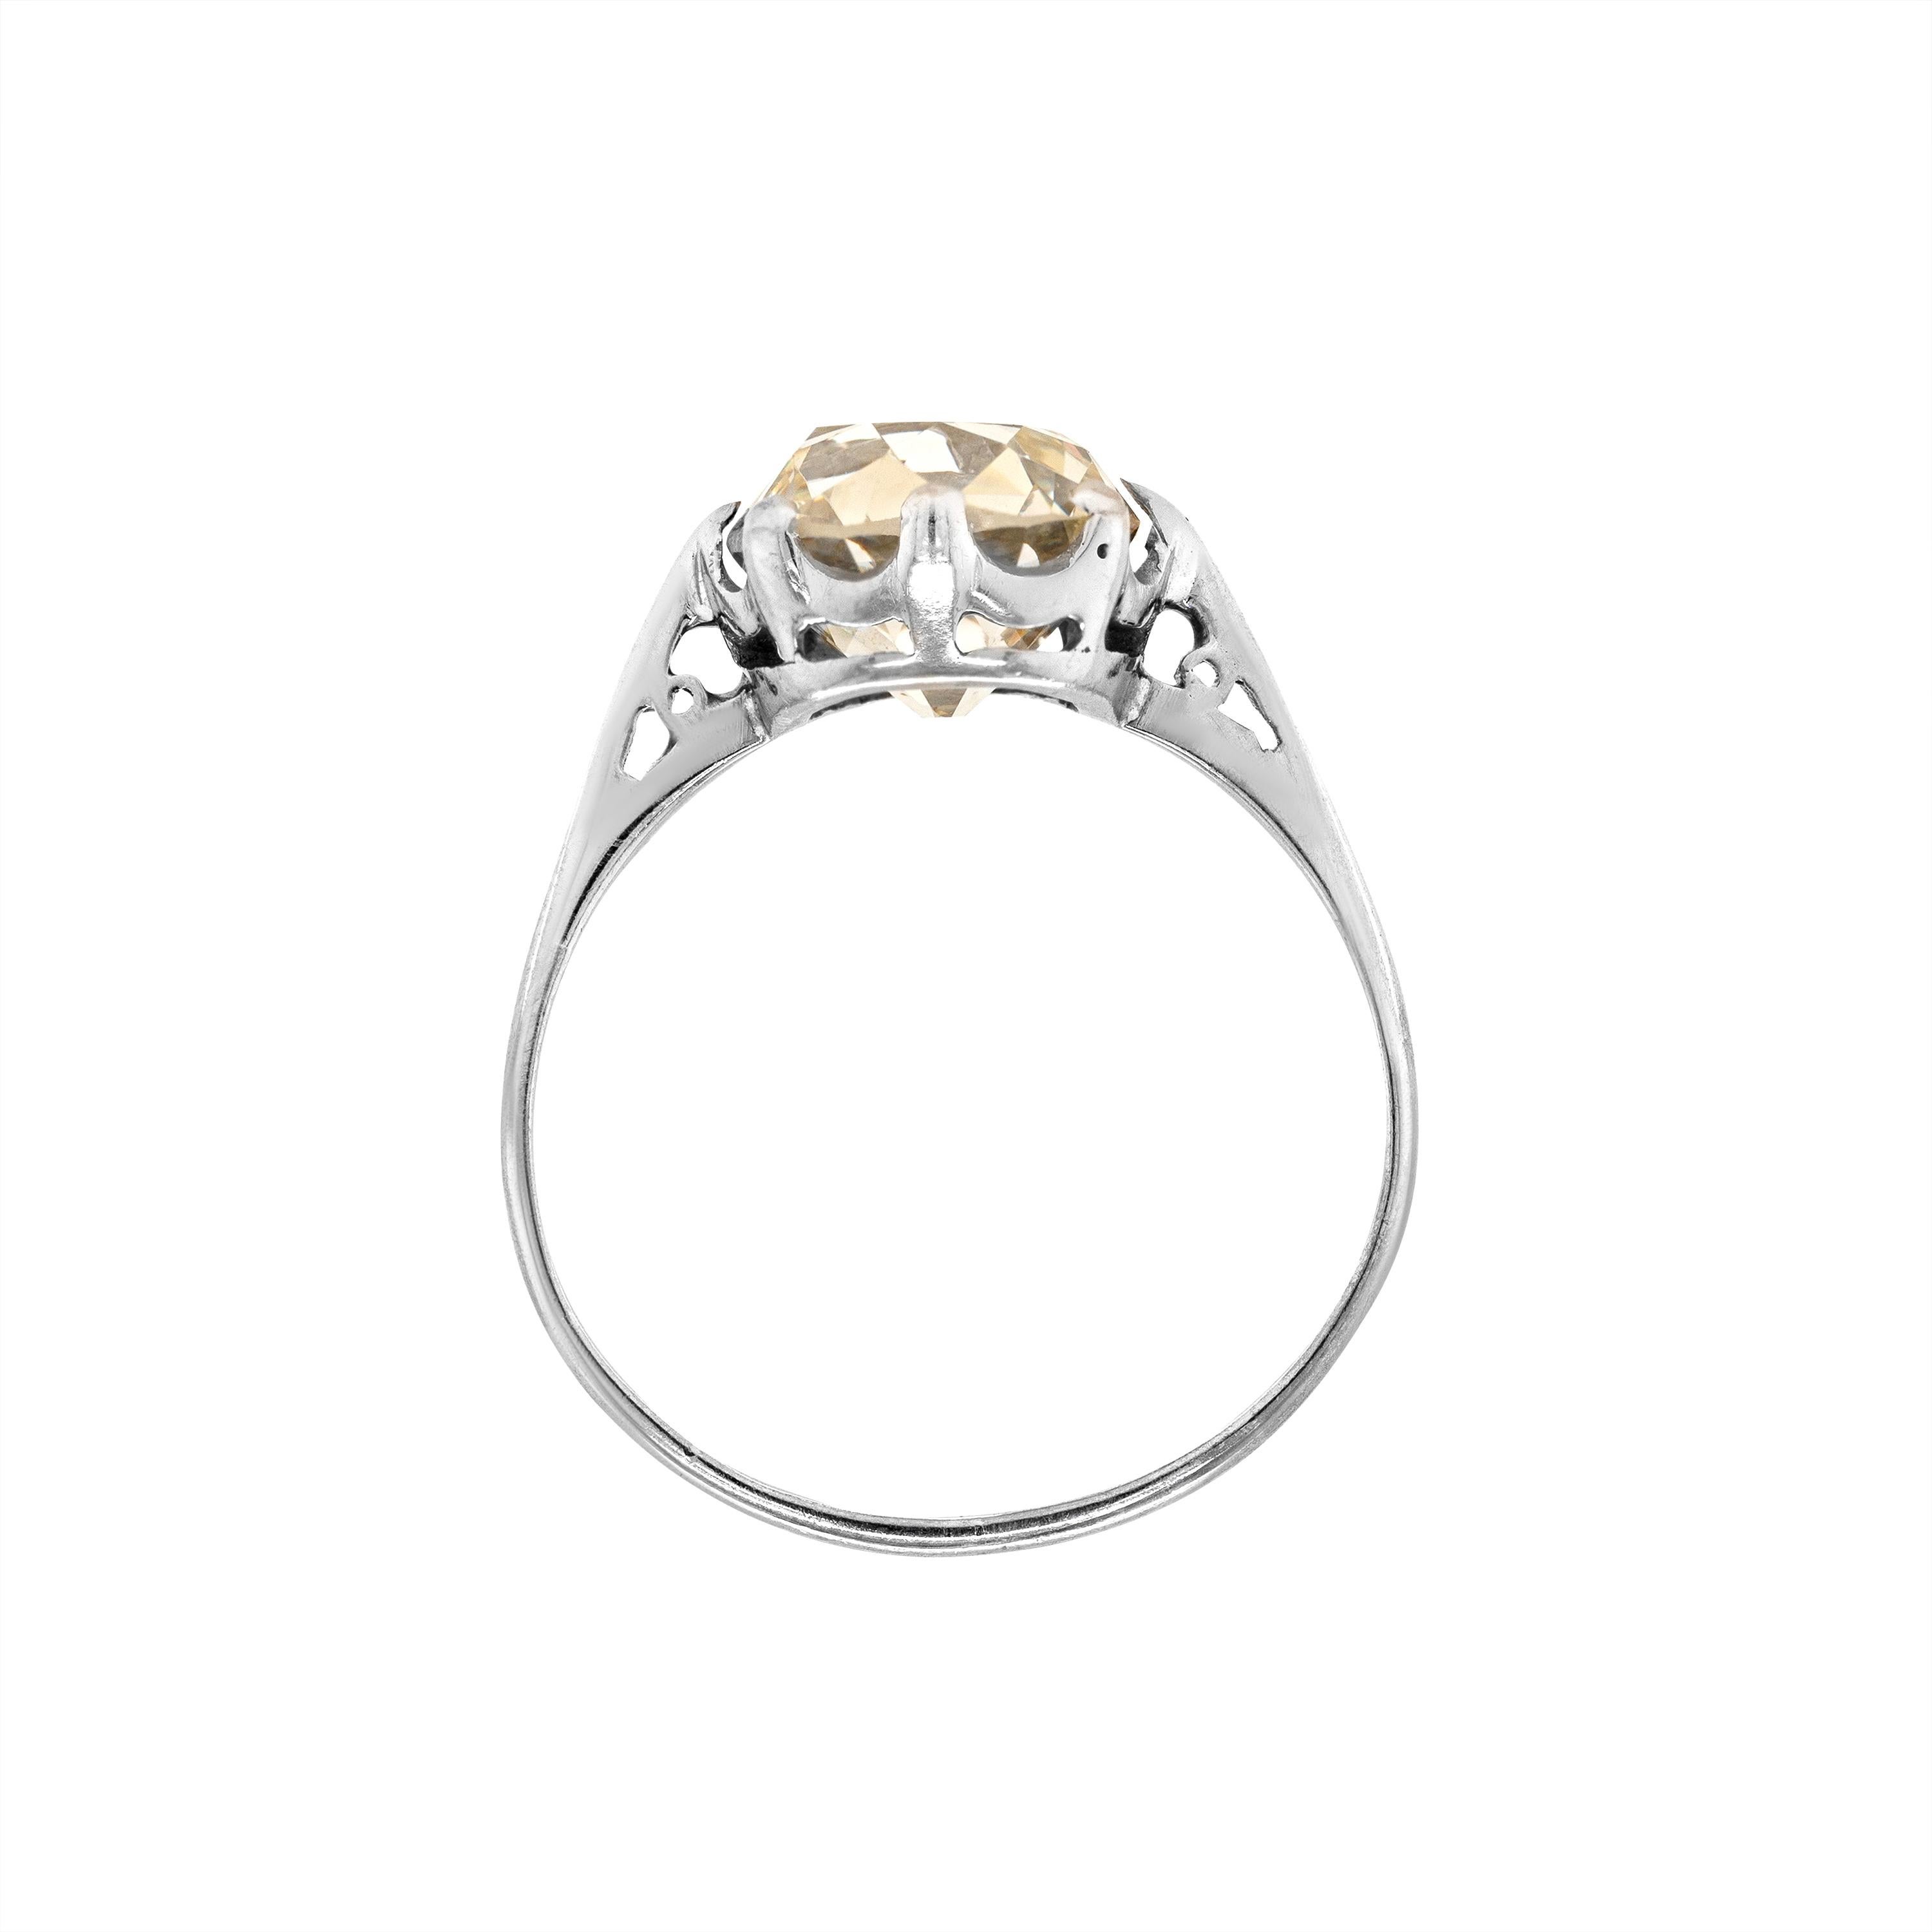 Old Mine Cut 3.60ct Old Mine Cushion Cut Diamond Solitaire 18k Gold Engagement Ring, c.1920s For Sale